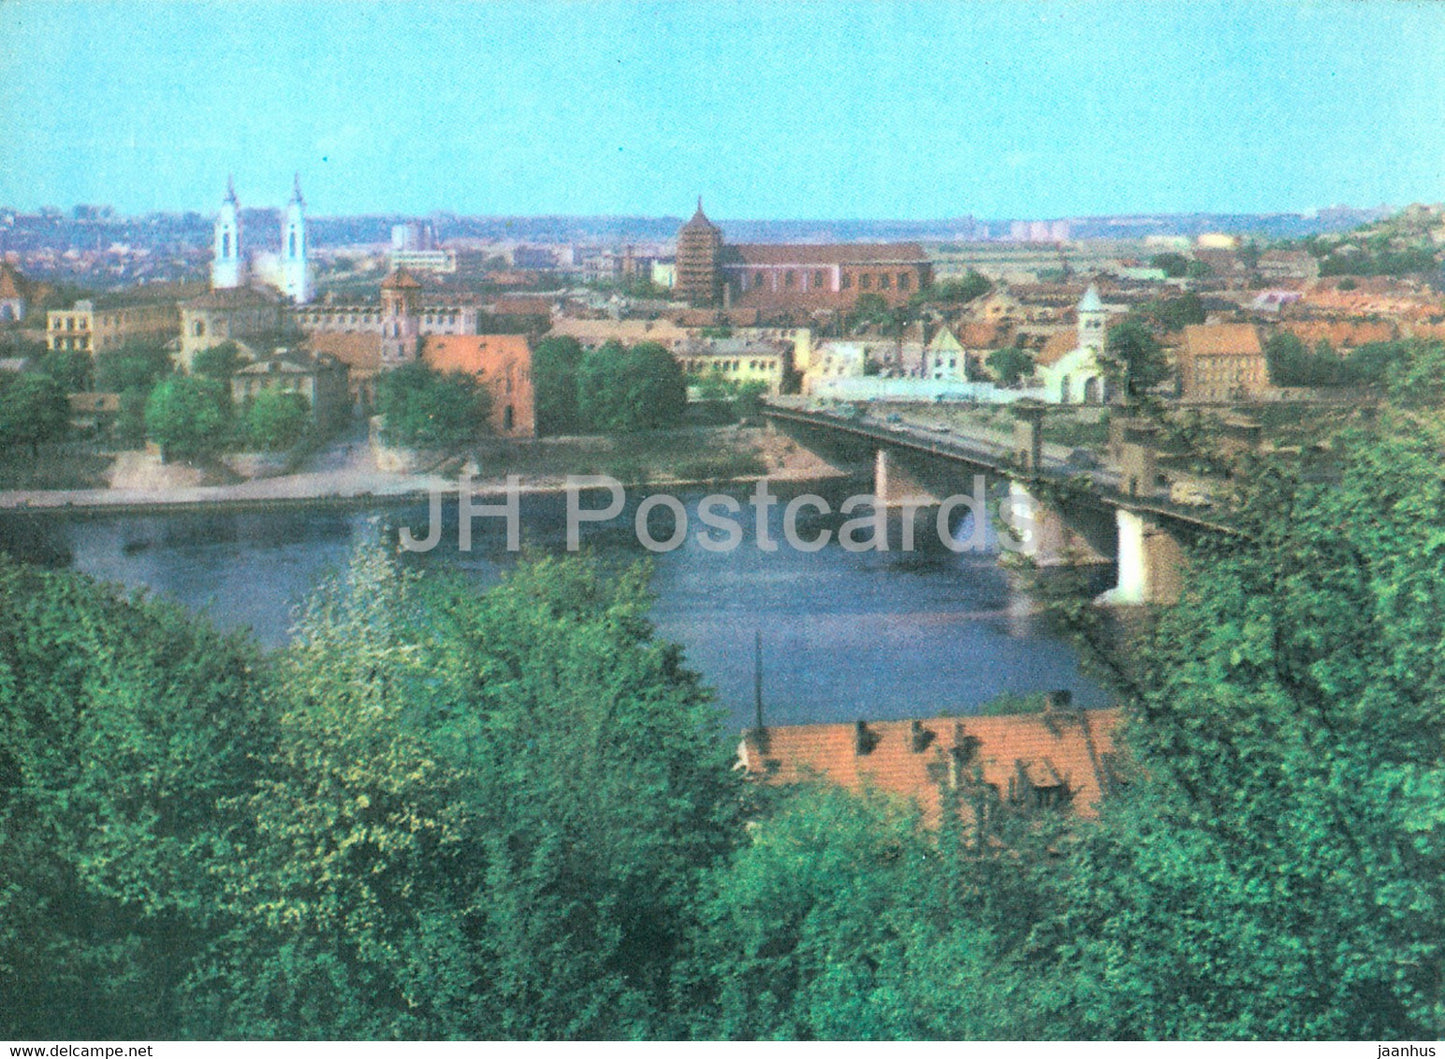 Kaunas - Bridge over the Nemunas river in the Old Town - 1982 - Lithuania USSR - unused - JH Postcards